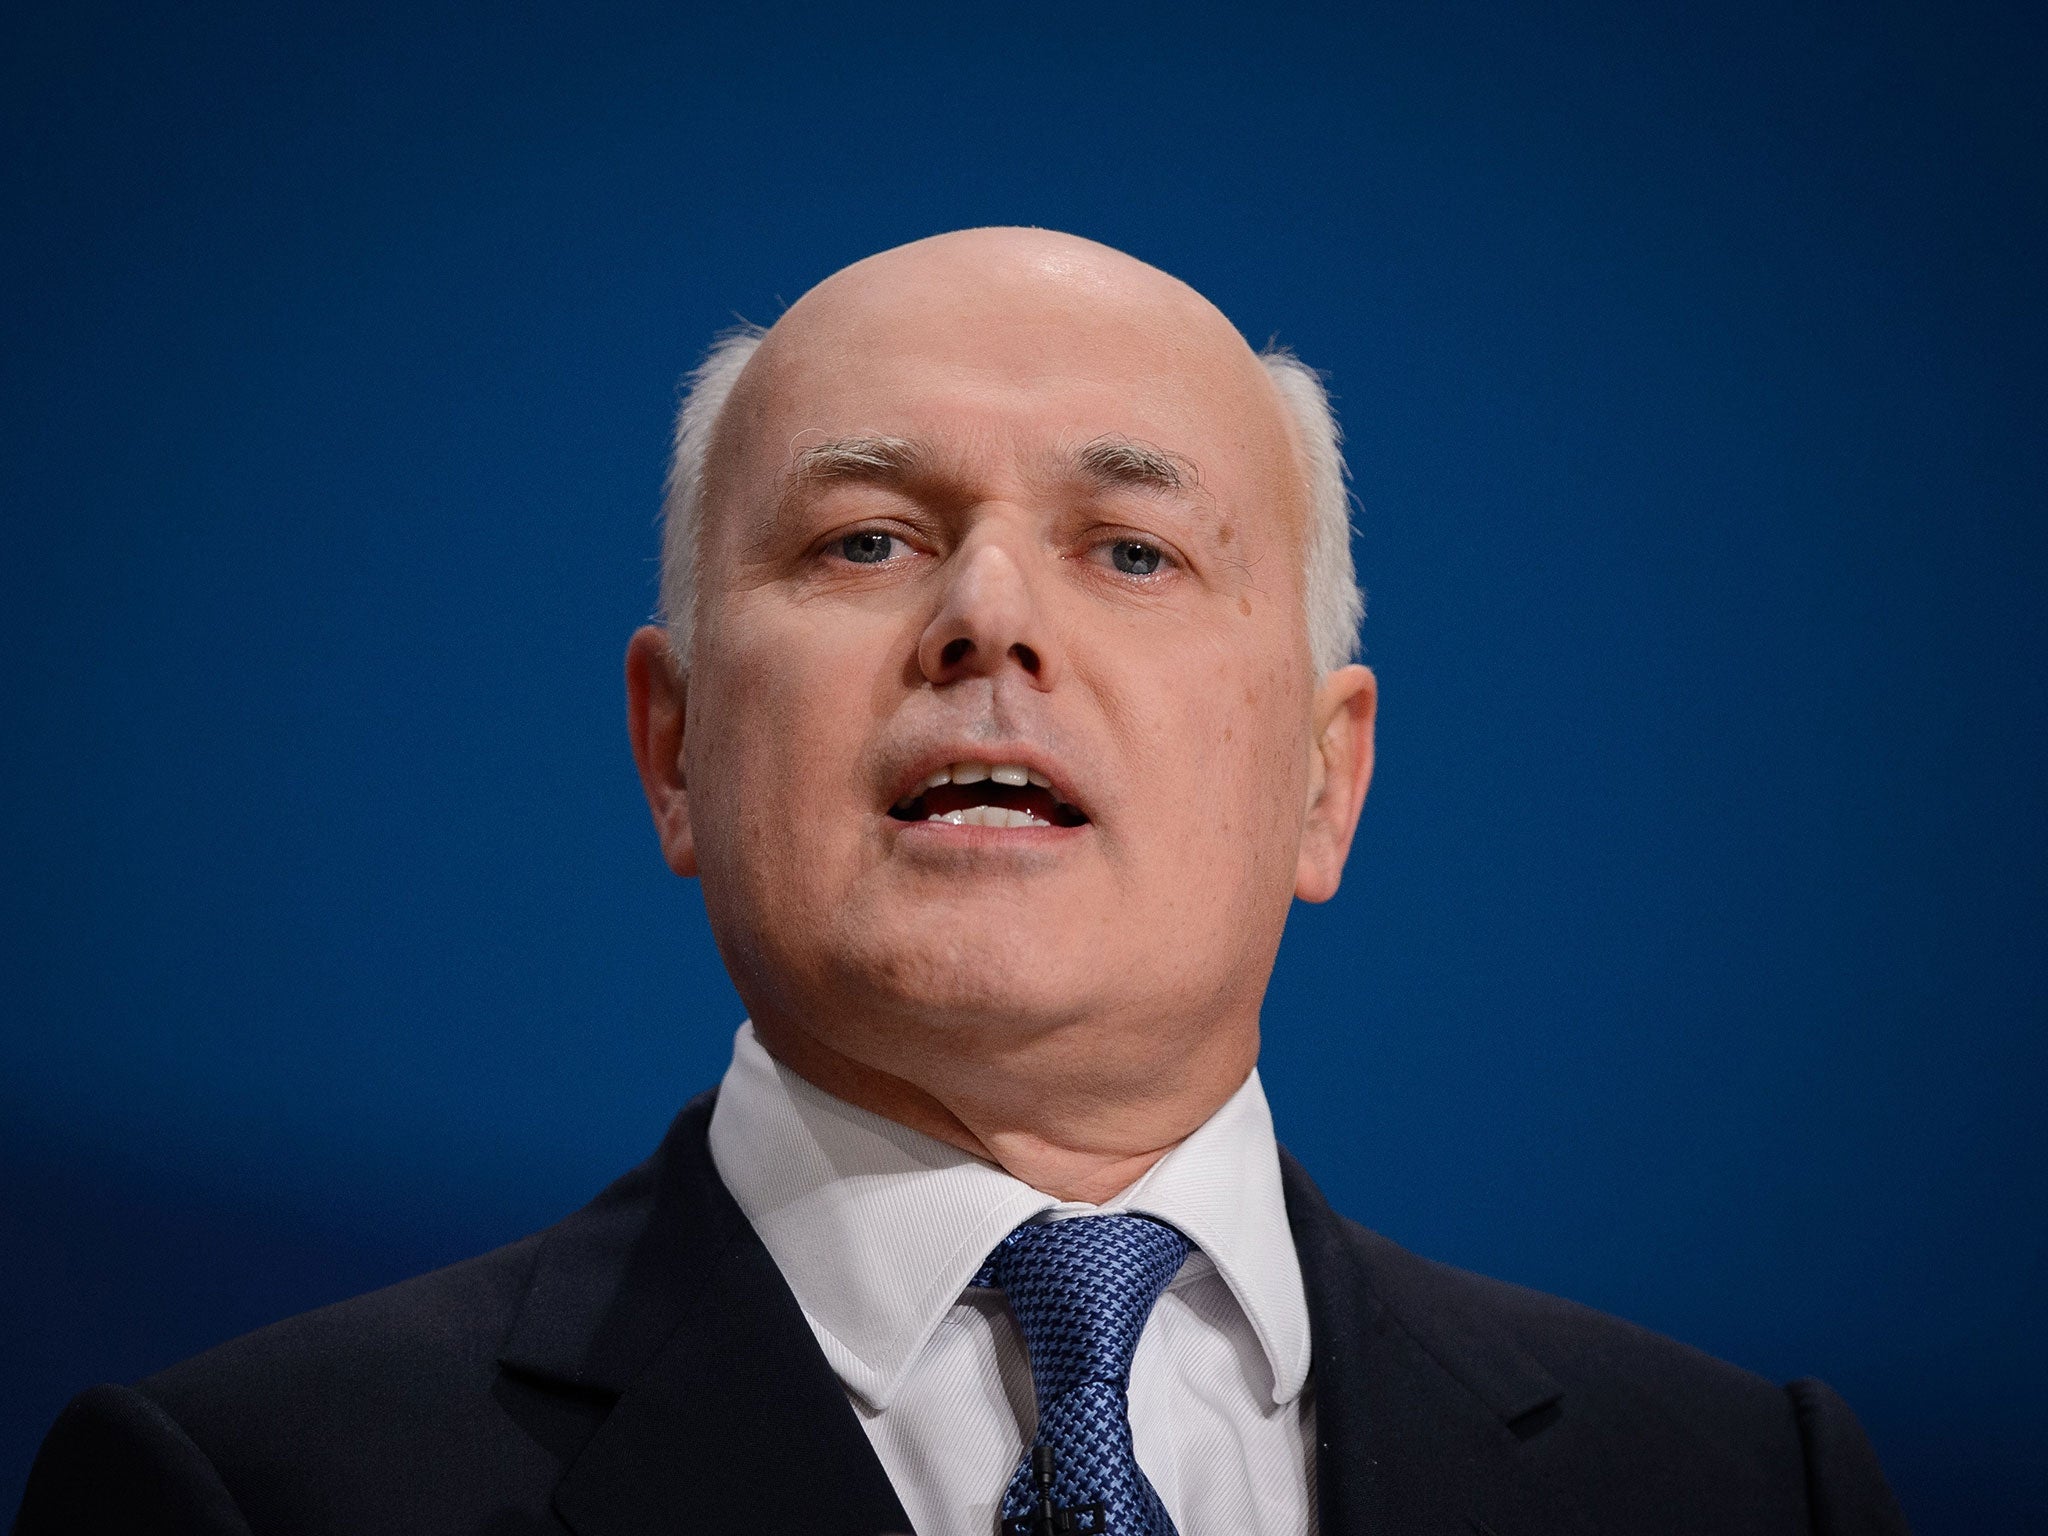 Iain Duncan Smith, pictured at the Conservative Party conference in September 2014, is to remain in charge of the government's welfare reforms